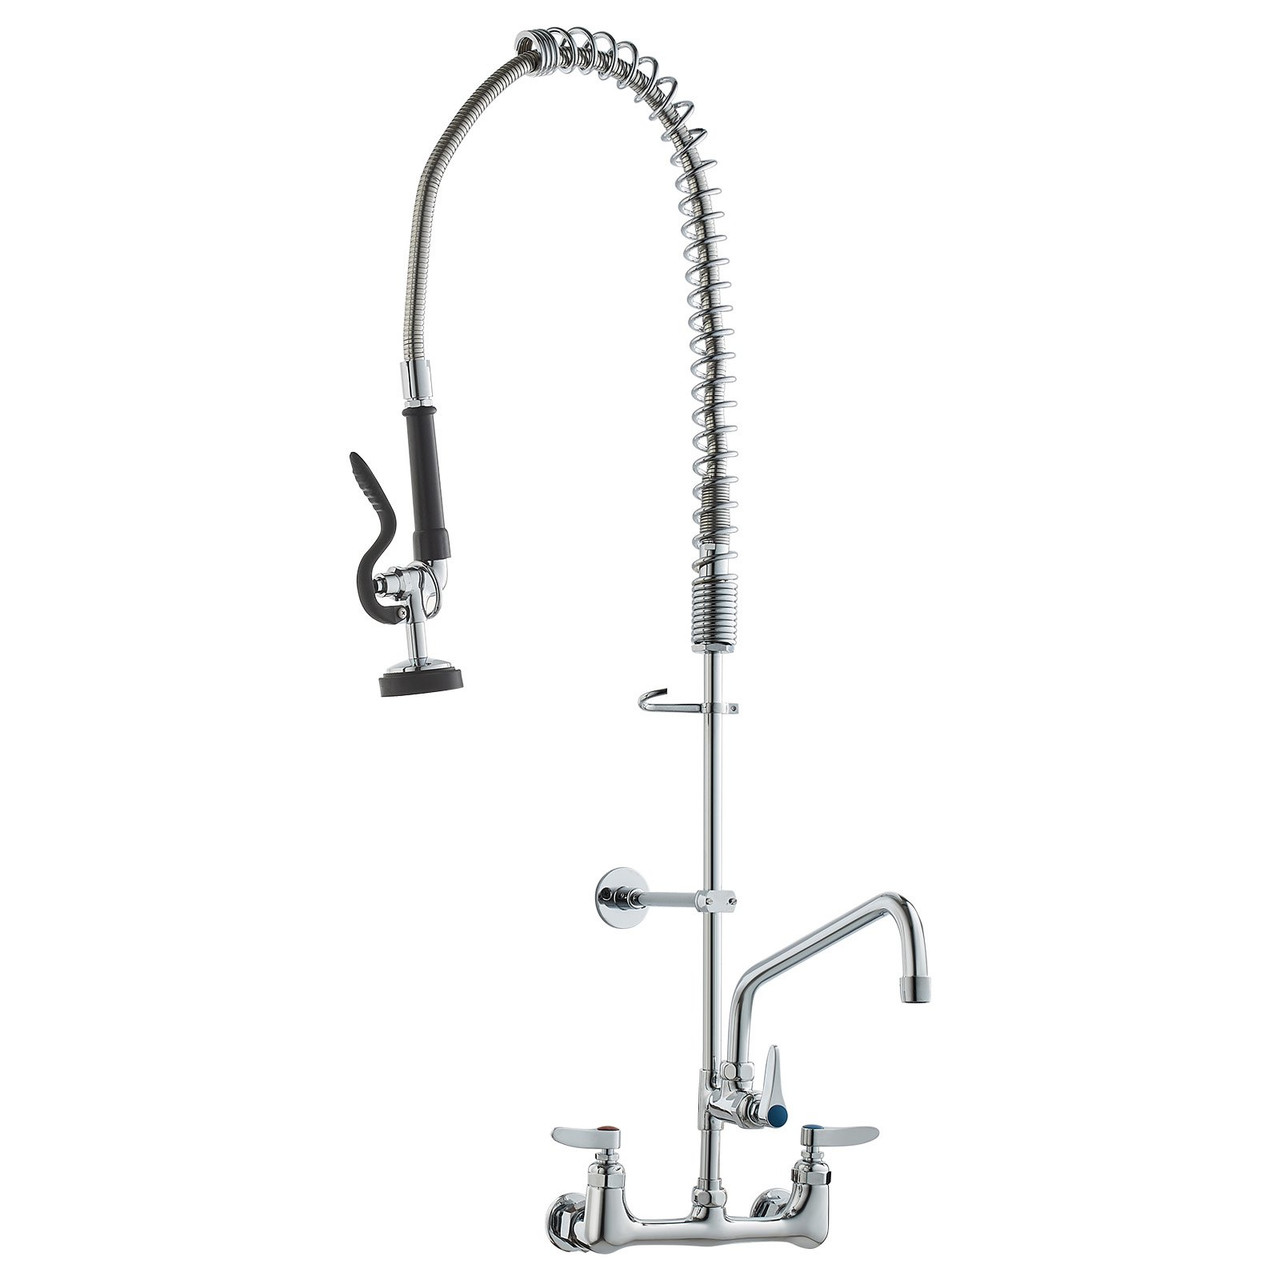 VEVOR Commercial Faucet with Pre-Rinse Sprayer, 36" Height, 8" Center, 12" Swing Spout, Wall Mount Kitchen Sink Faucet, Brass Constructed Device with Pull Down Spray, for 1/2/3 Compartment Sink